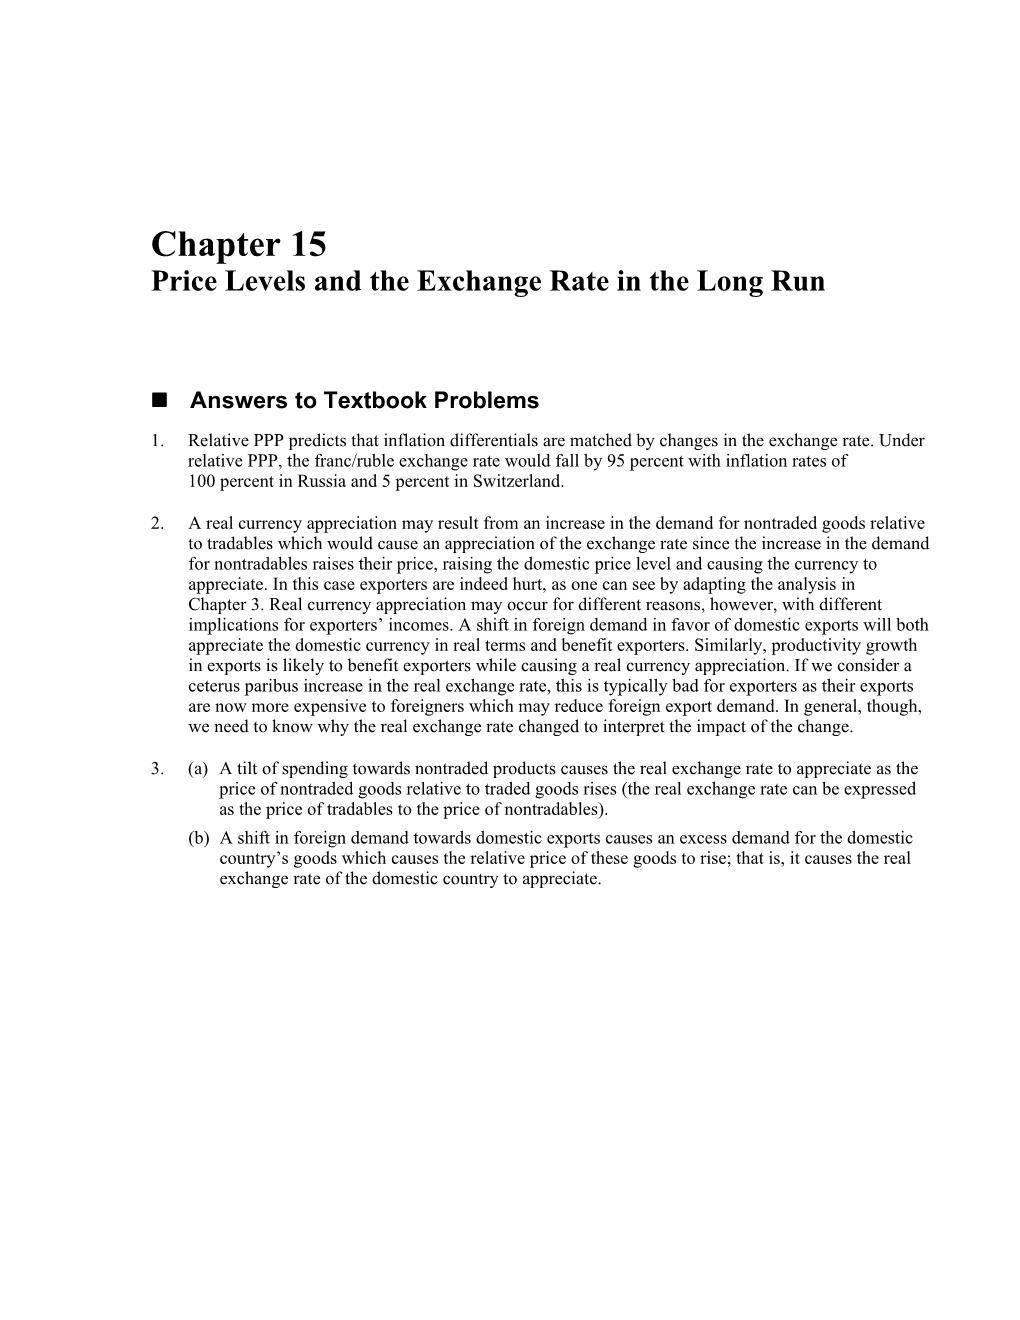 Chapter 15 Price Levels and the Exchange Rate in the Long Run 1